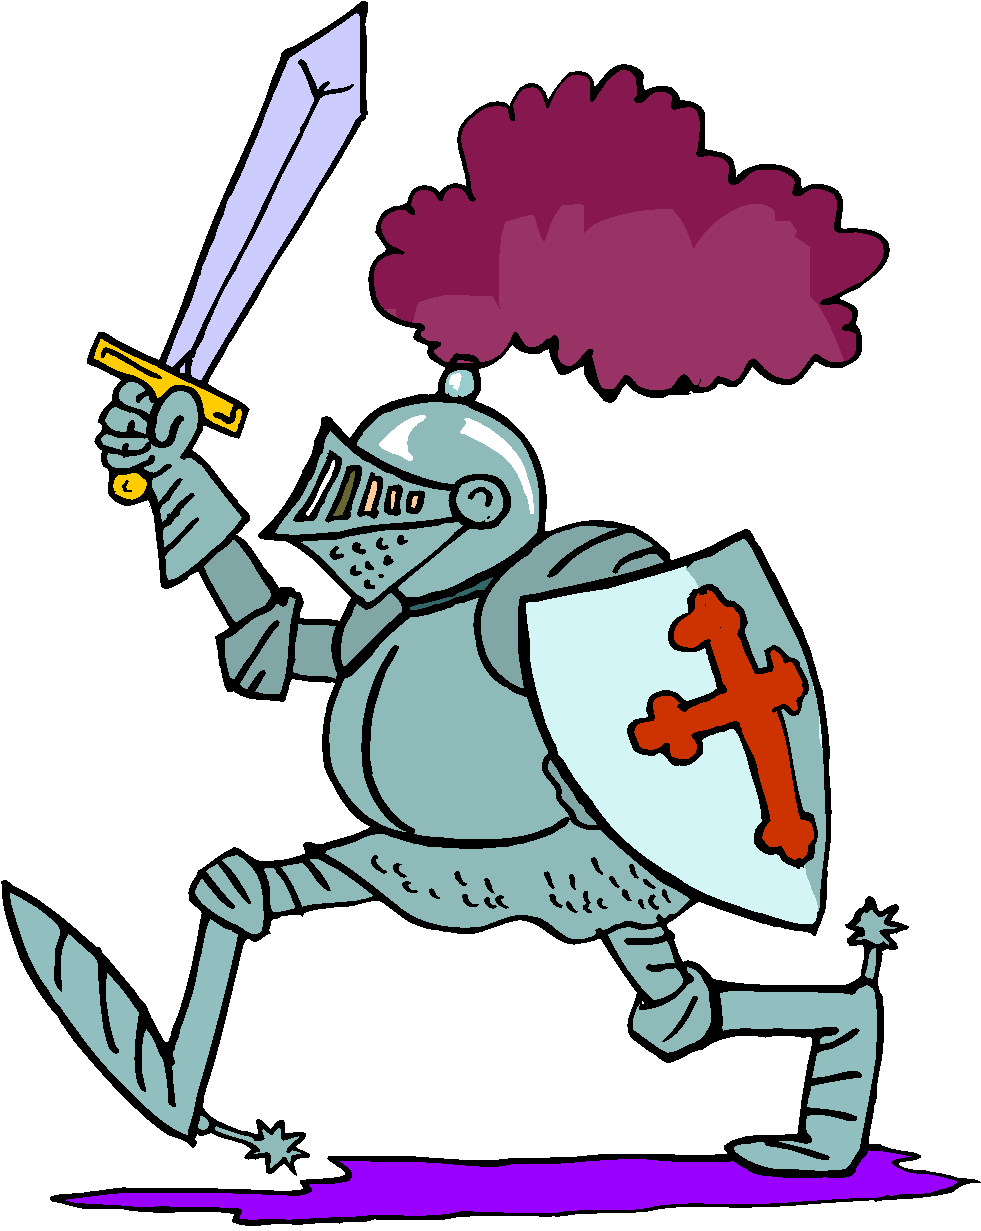 Knight clip art in vector or format free 2 image 